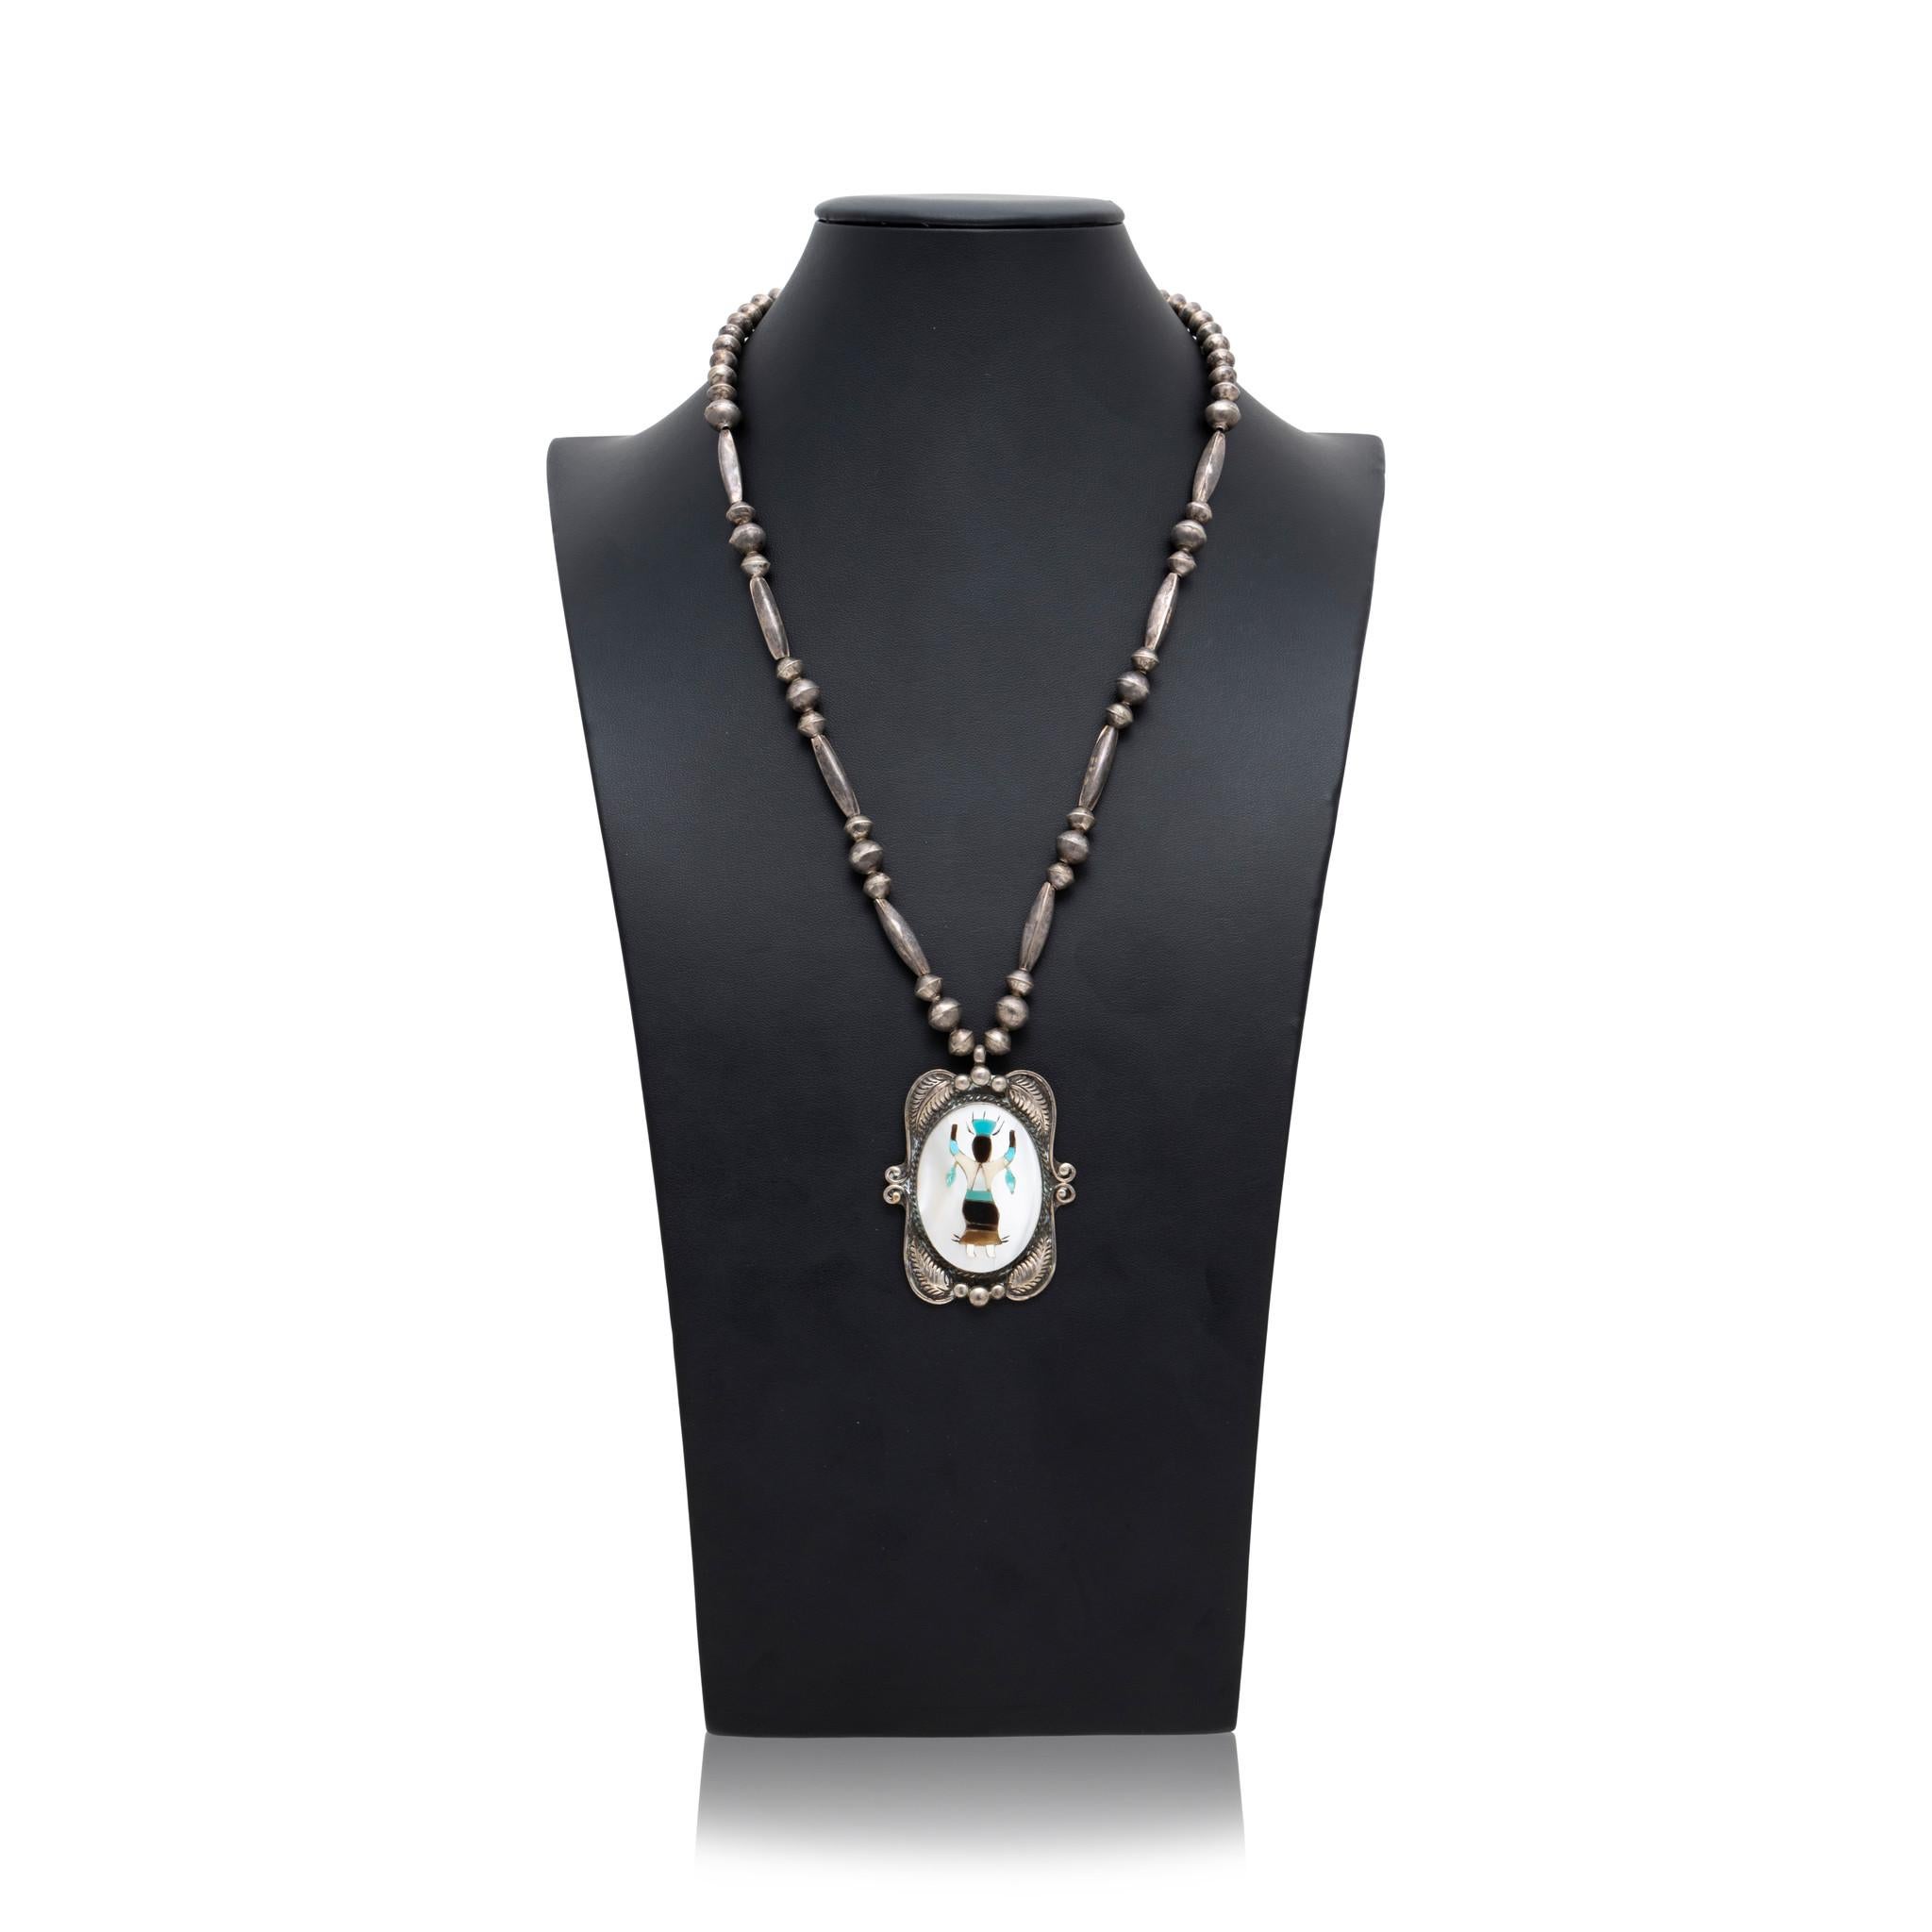 Native American Navajo Indian dancer multi inlaid stone necklace and bracelet. Featuring a large pendant with mother of pearl background including amber, onyx, spiny oyster, and turquoise dancer figure in center. Framed by twisted rope border,